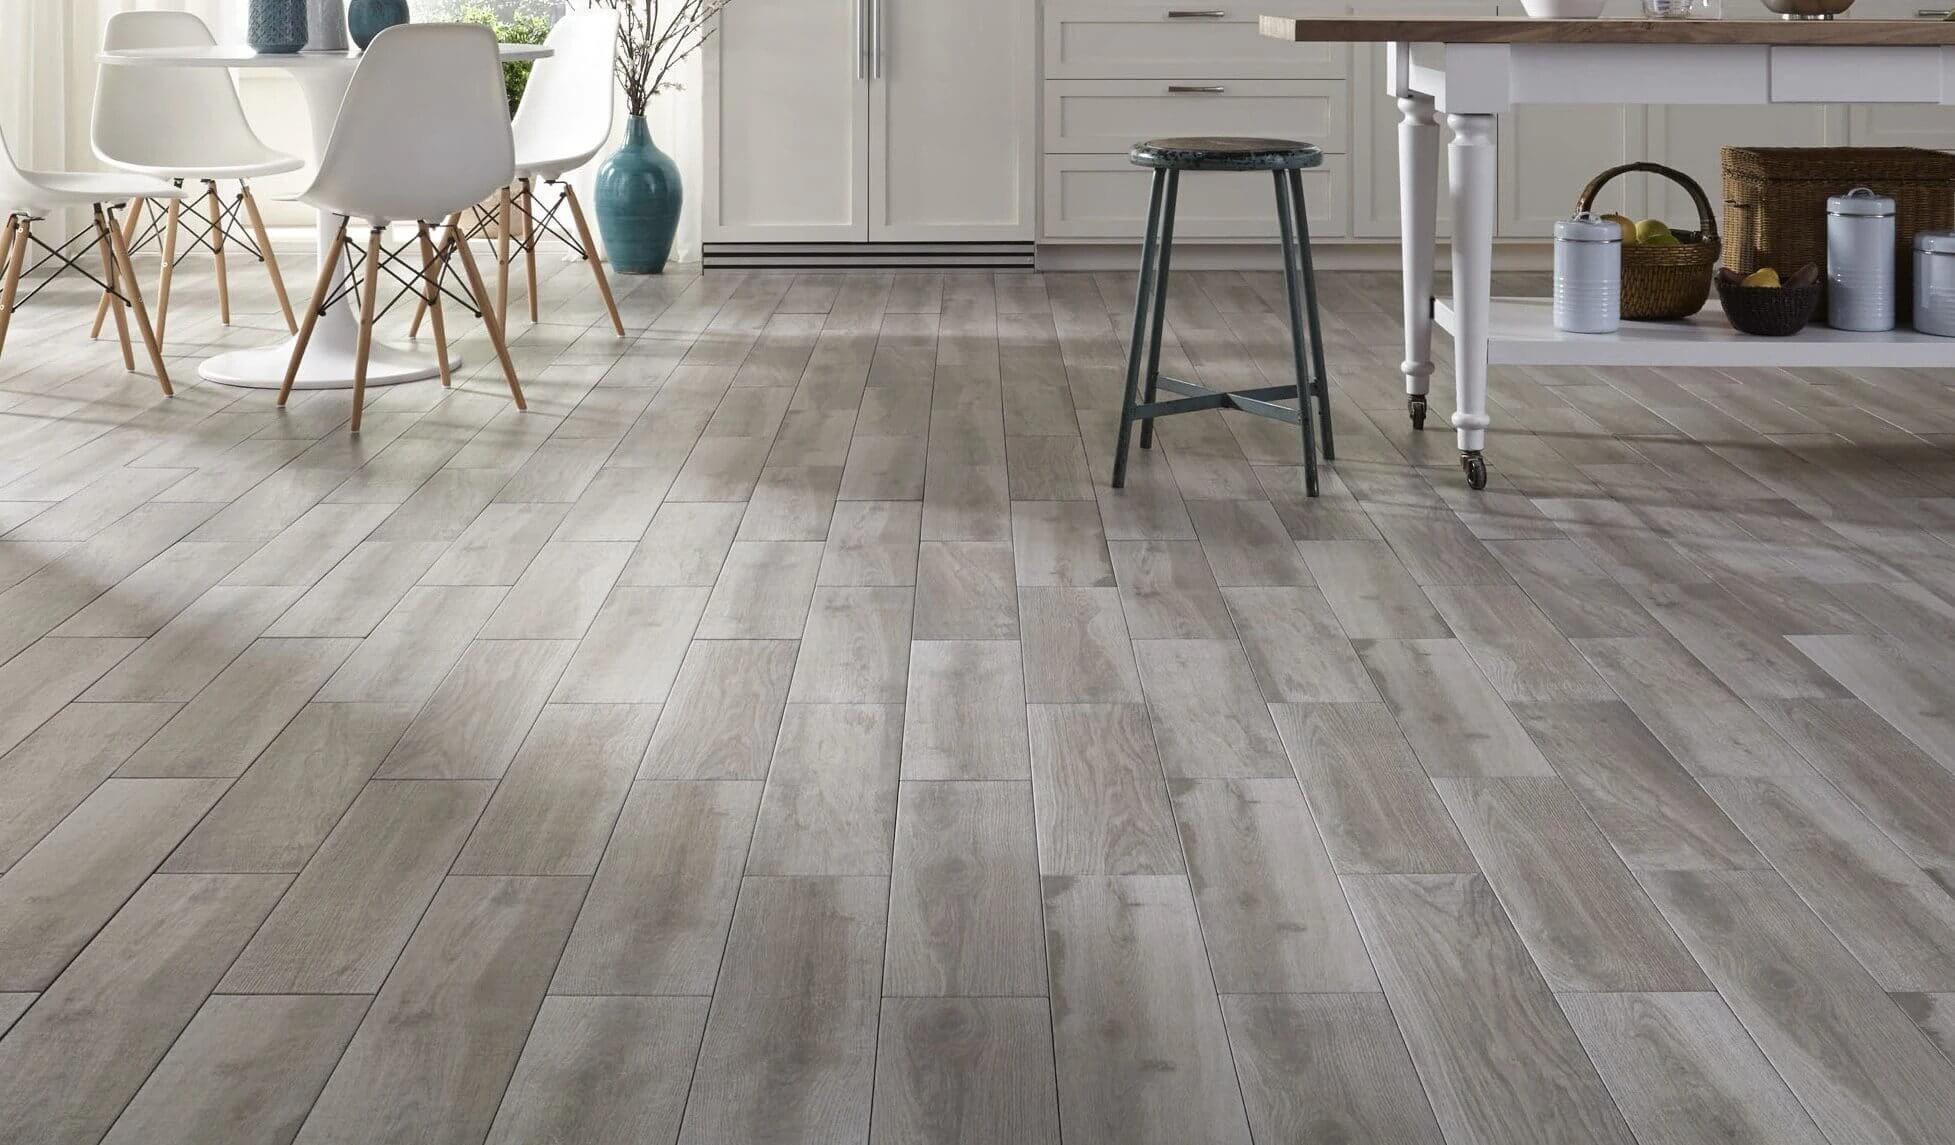 The Final Forecast of Flooring Trends